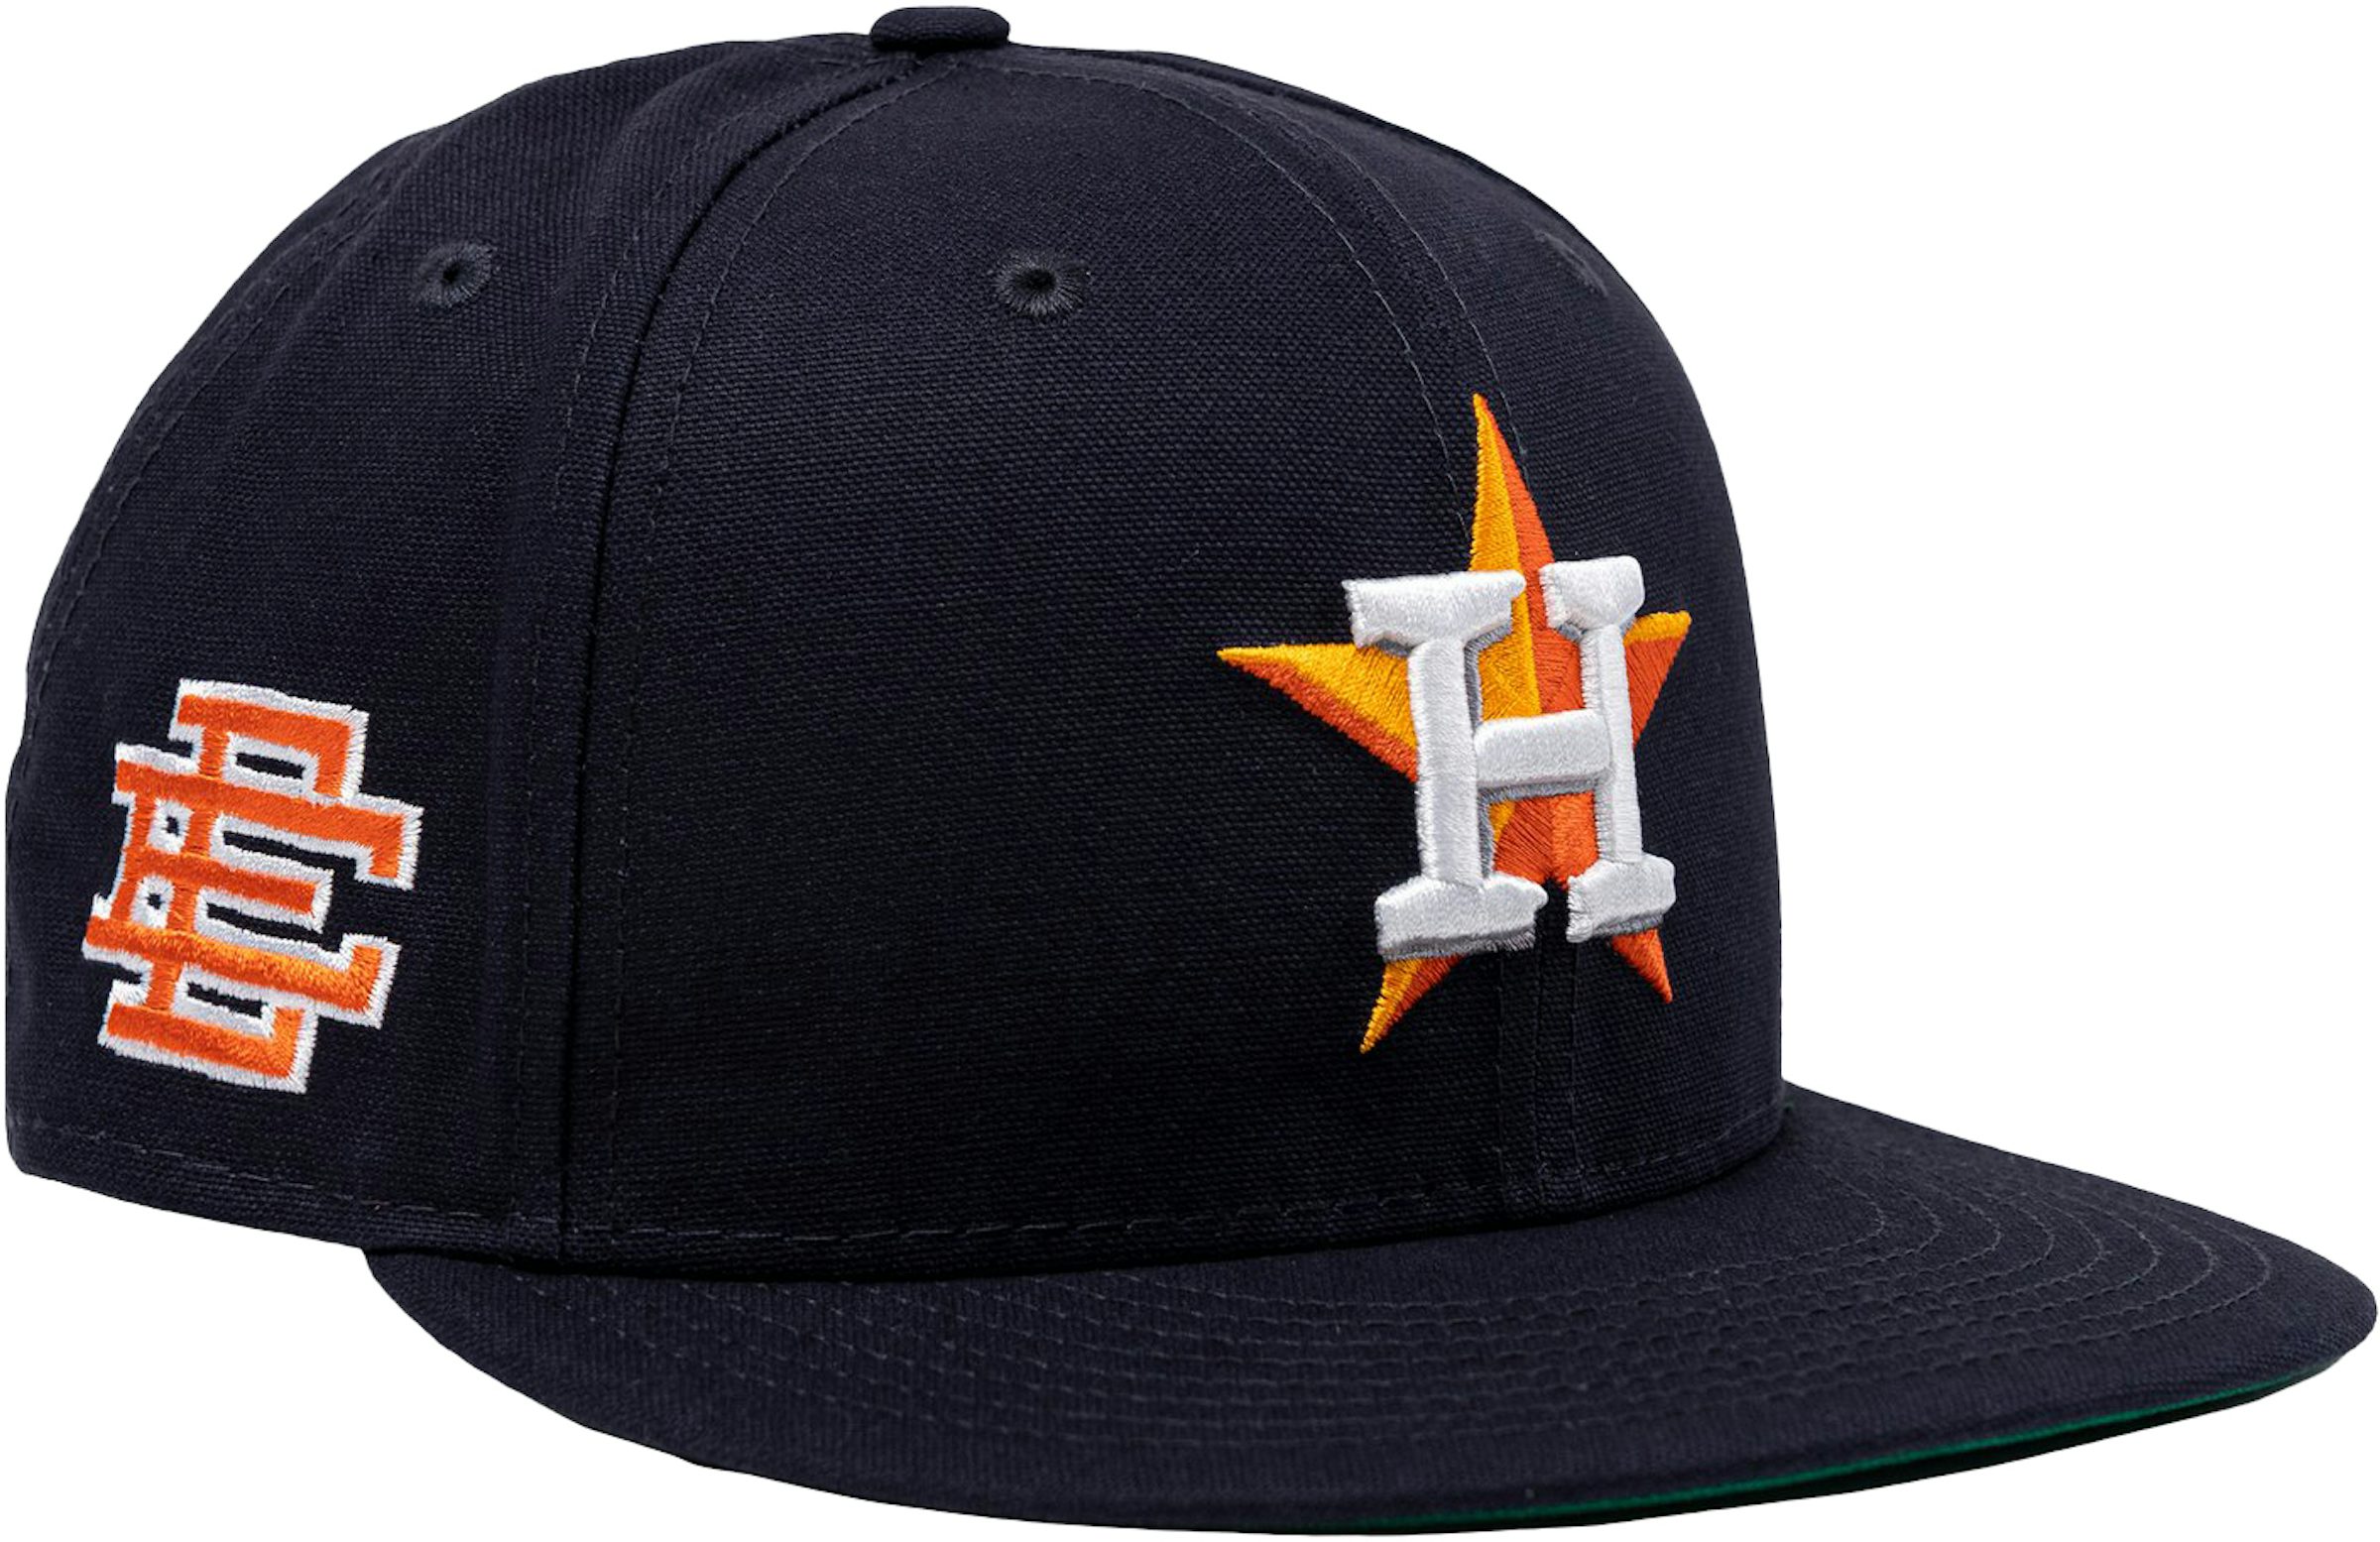 Other, Travis Scott X Houston Astros 59fifty Fitted